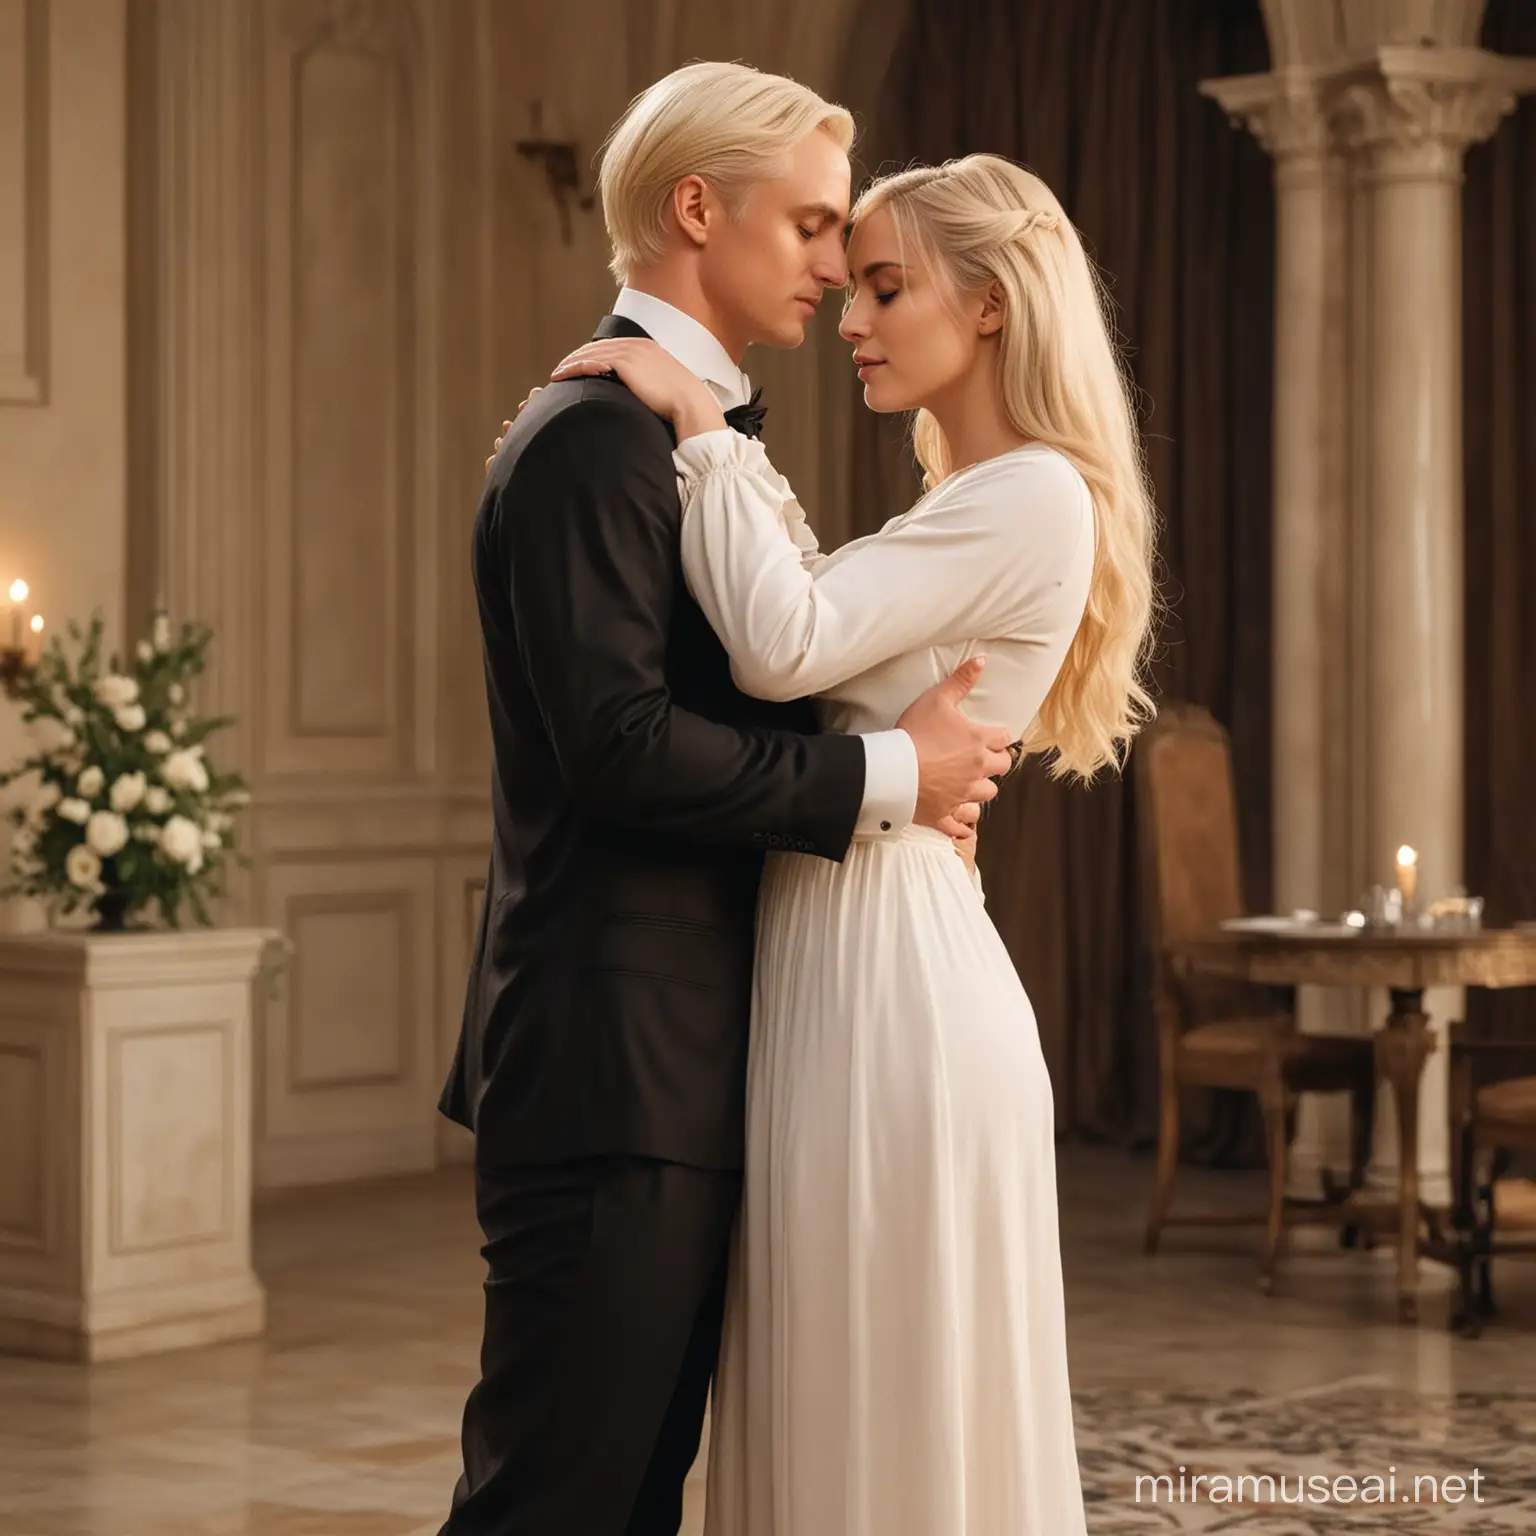 Elegant Draco Malfoy Embracing Blonde Woman and Girl in Evening Attire